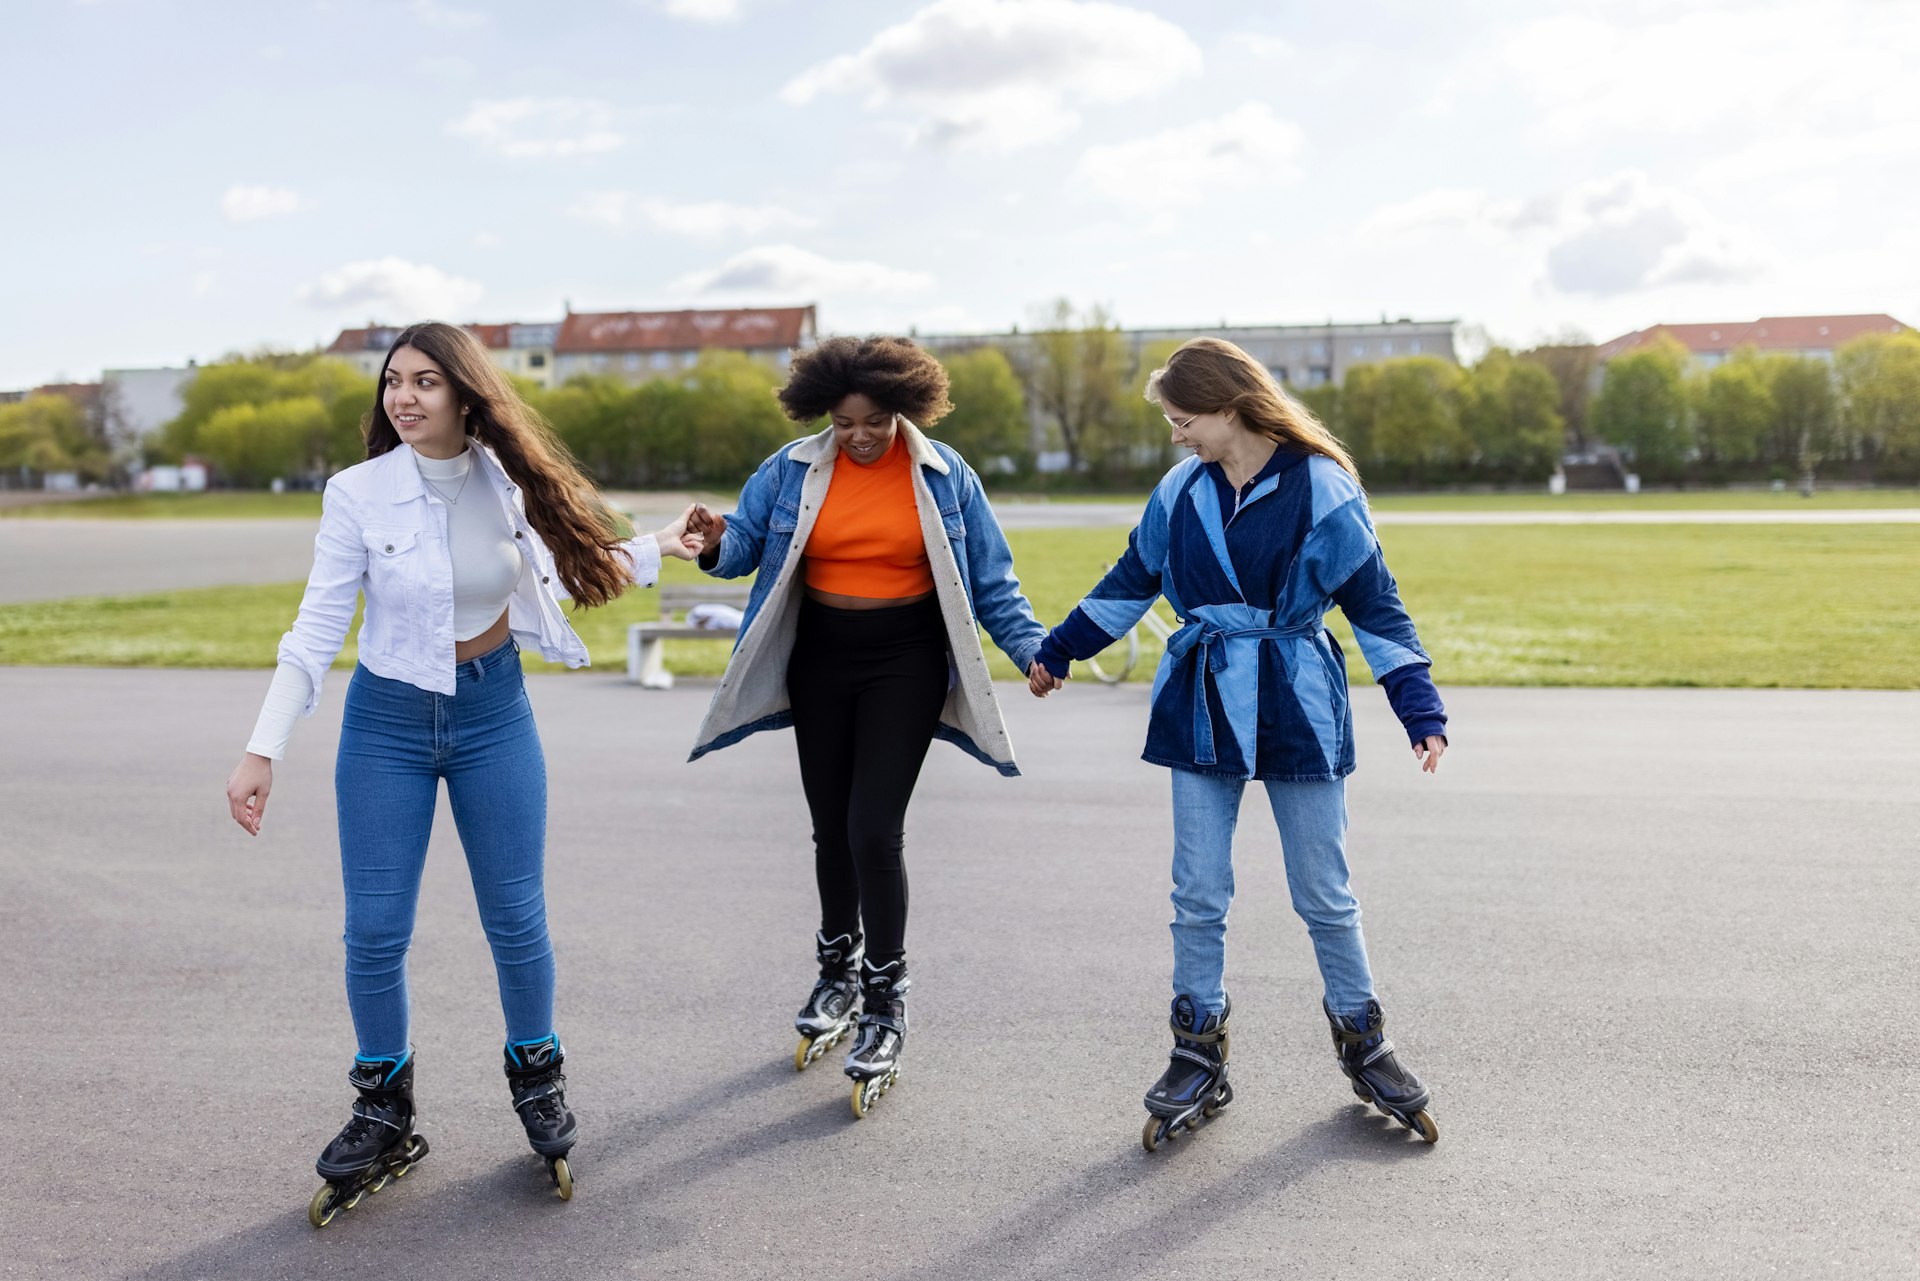 Three teenage girls roller-skate on the runway of a former airport, now a vast park in Berlin